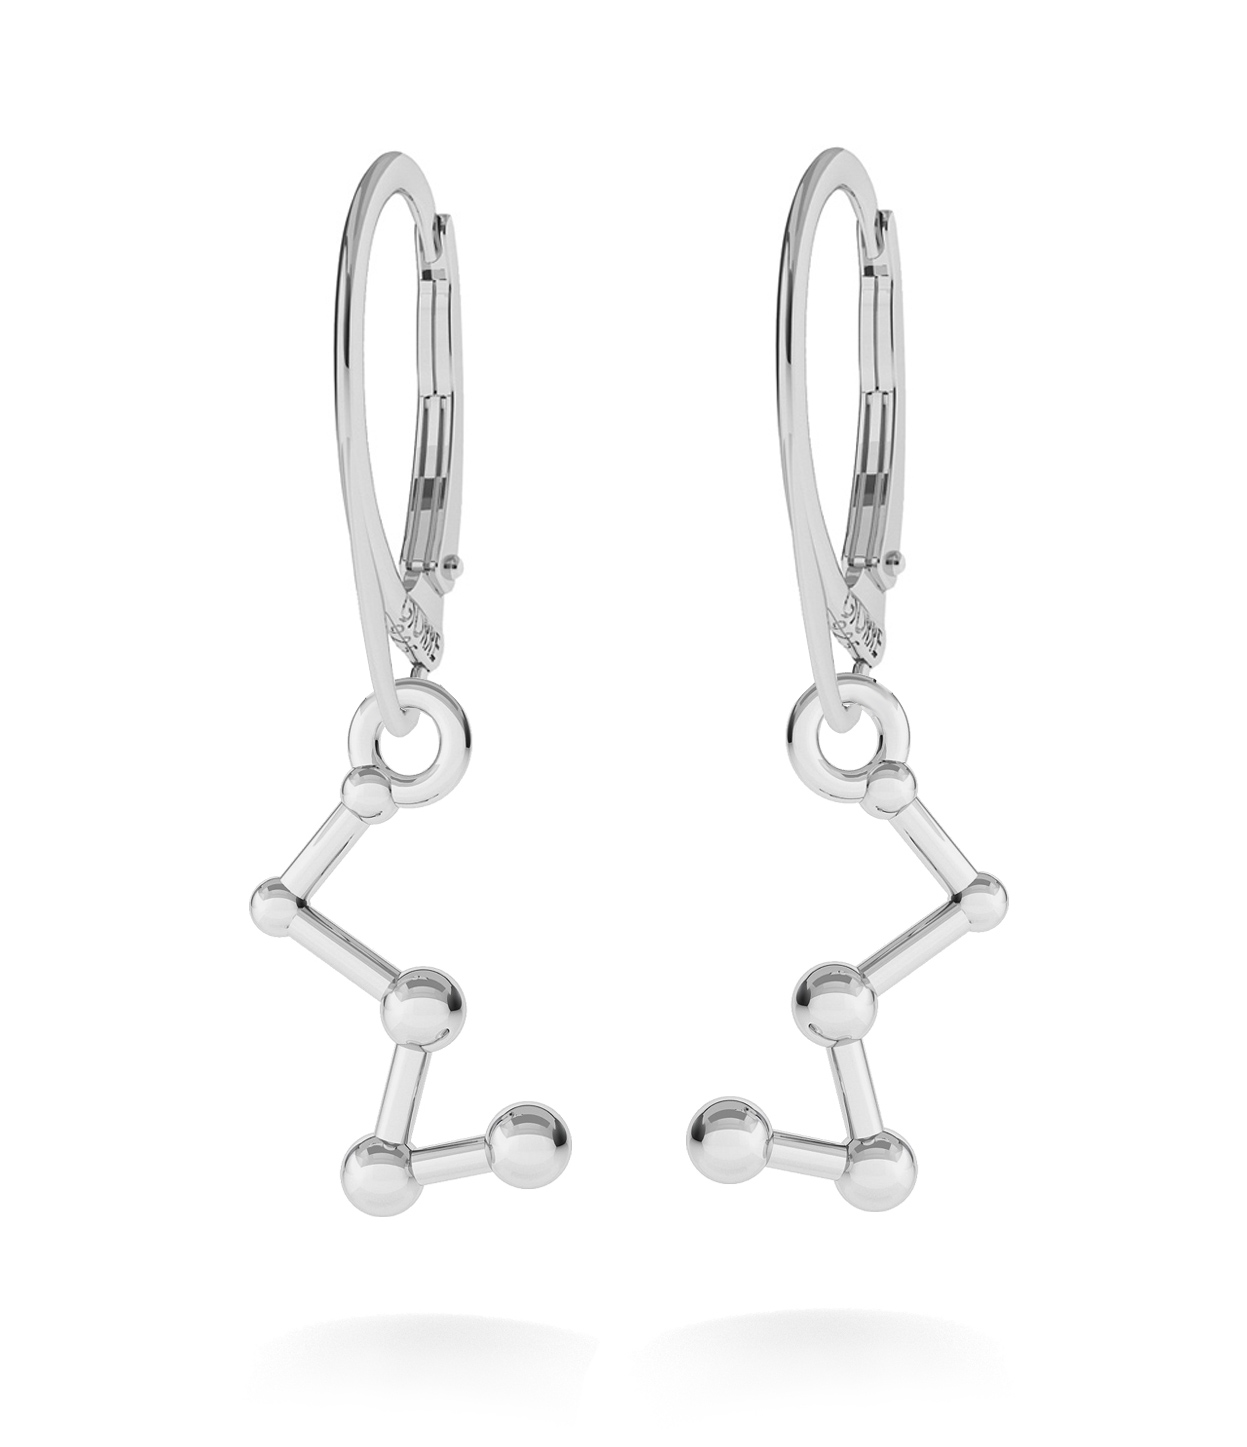 CONSTELLATION CASSIOPEIA EARRINGS SILVER 925